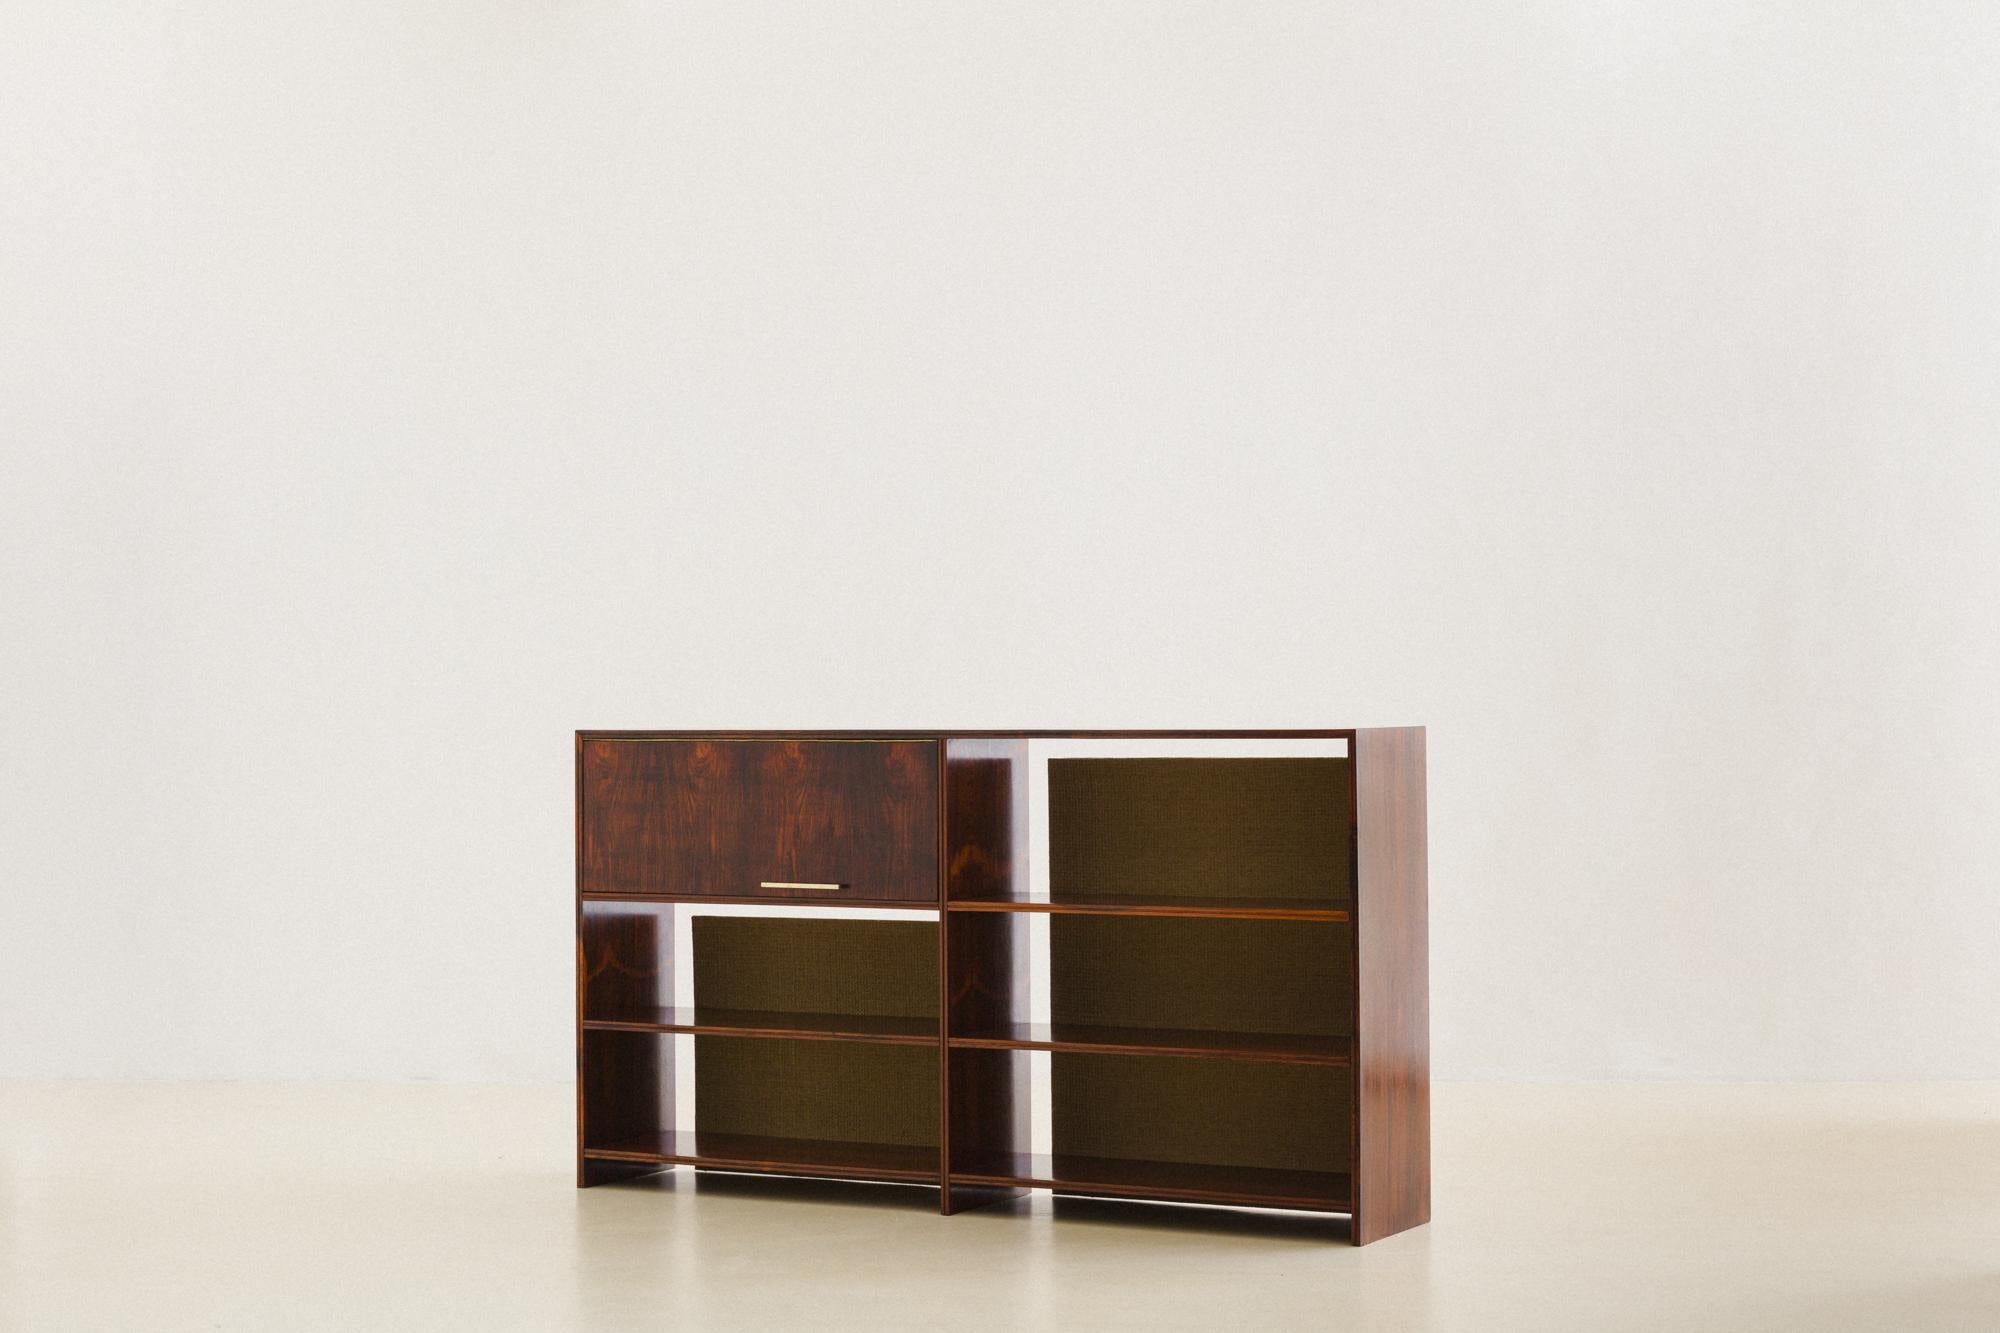 This elegant bookshelf is one of the many Móveis Cimo's furniture pieces manufactured during the 1960s. The piece is composed of five shelves and one storage compartment that opens with a beautiful horizontal brass handler. The entire piece is